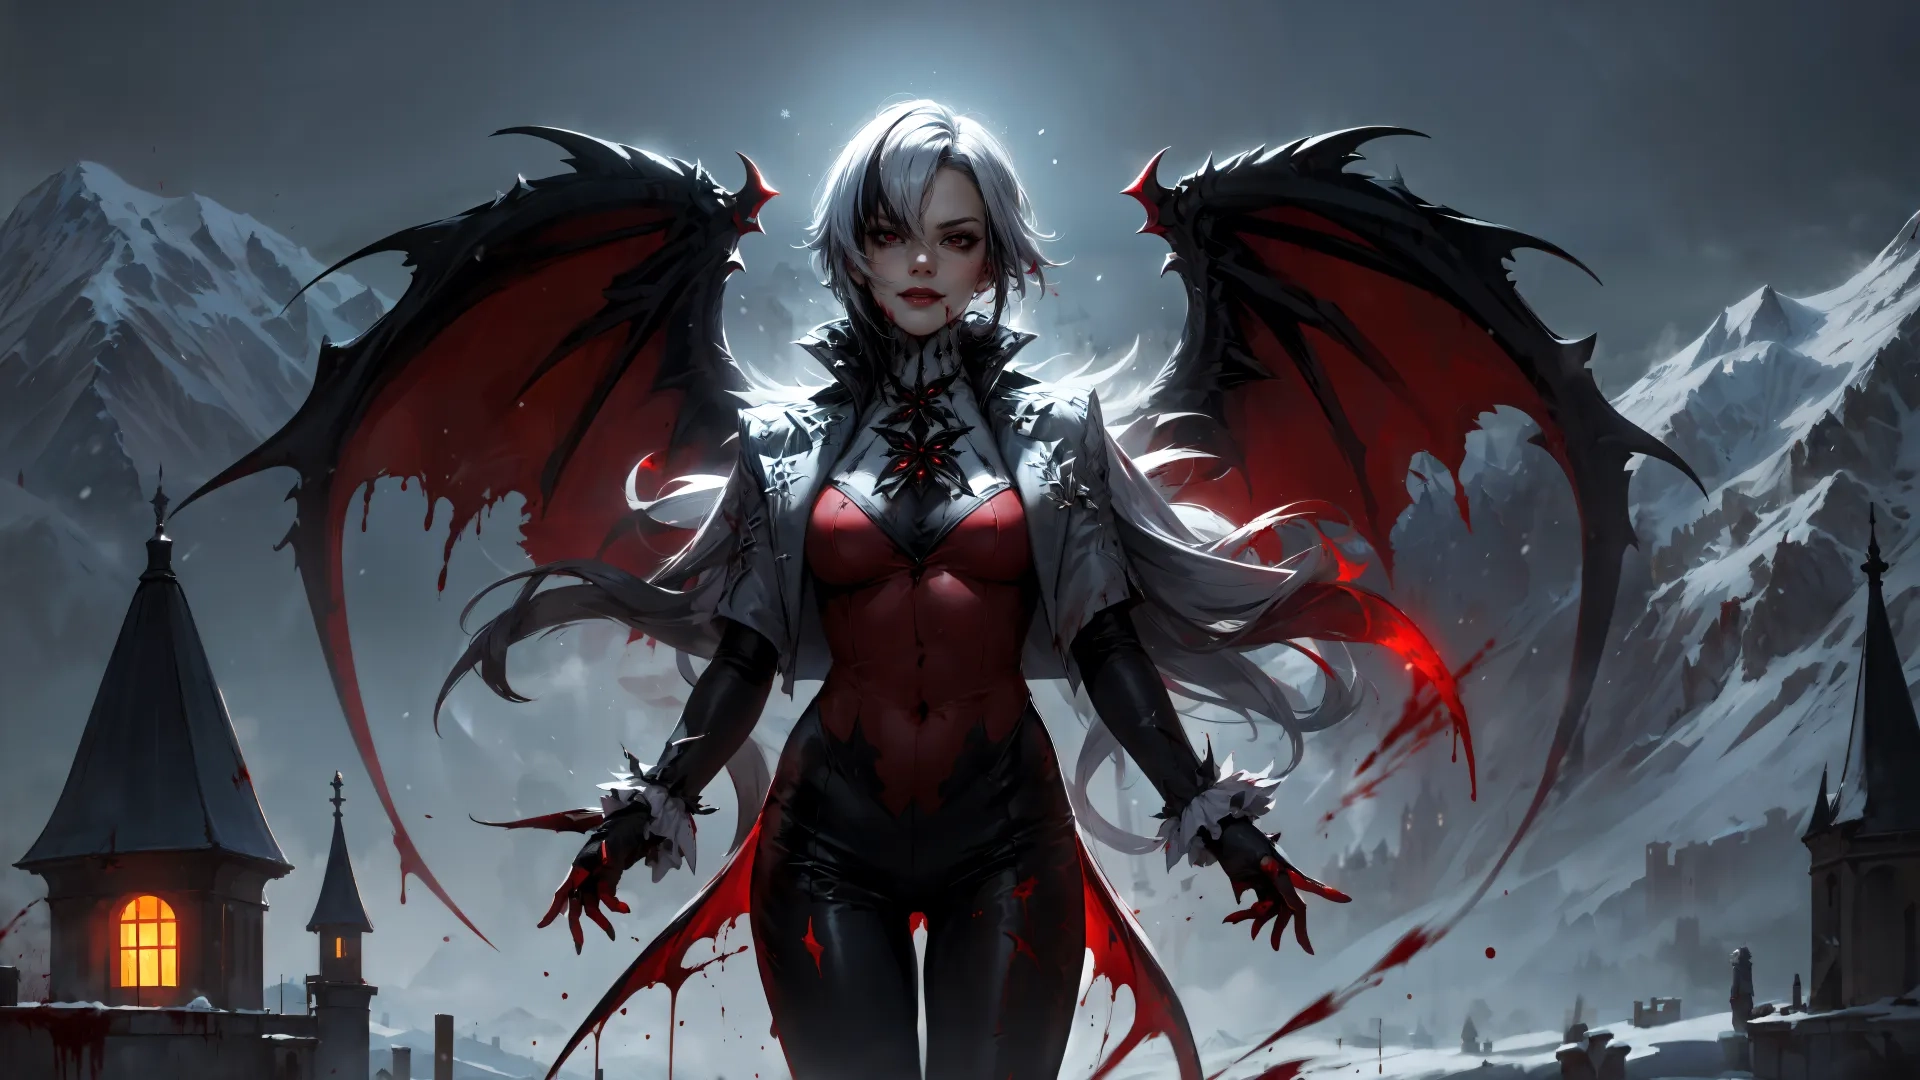 an illustration of a female vampire dressed in a dark outfit in front of a castle with snow and mountains in the background with an evil angel like character holding two
